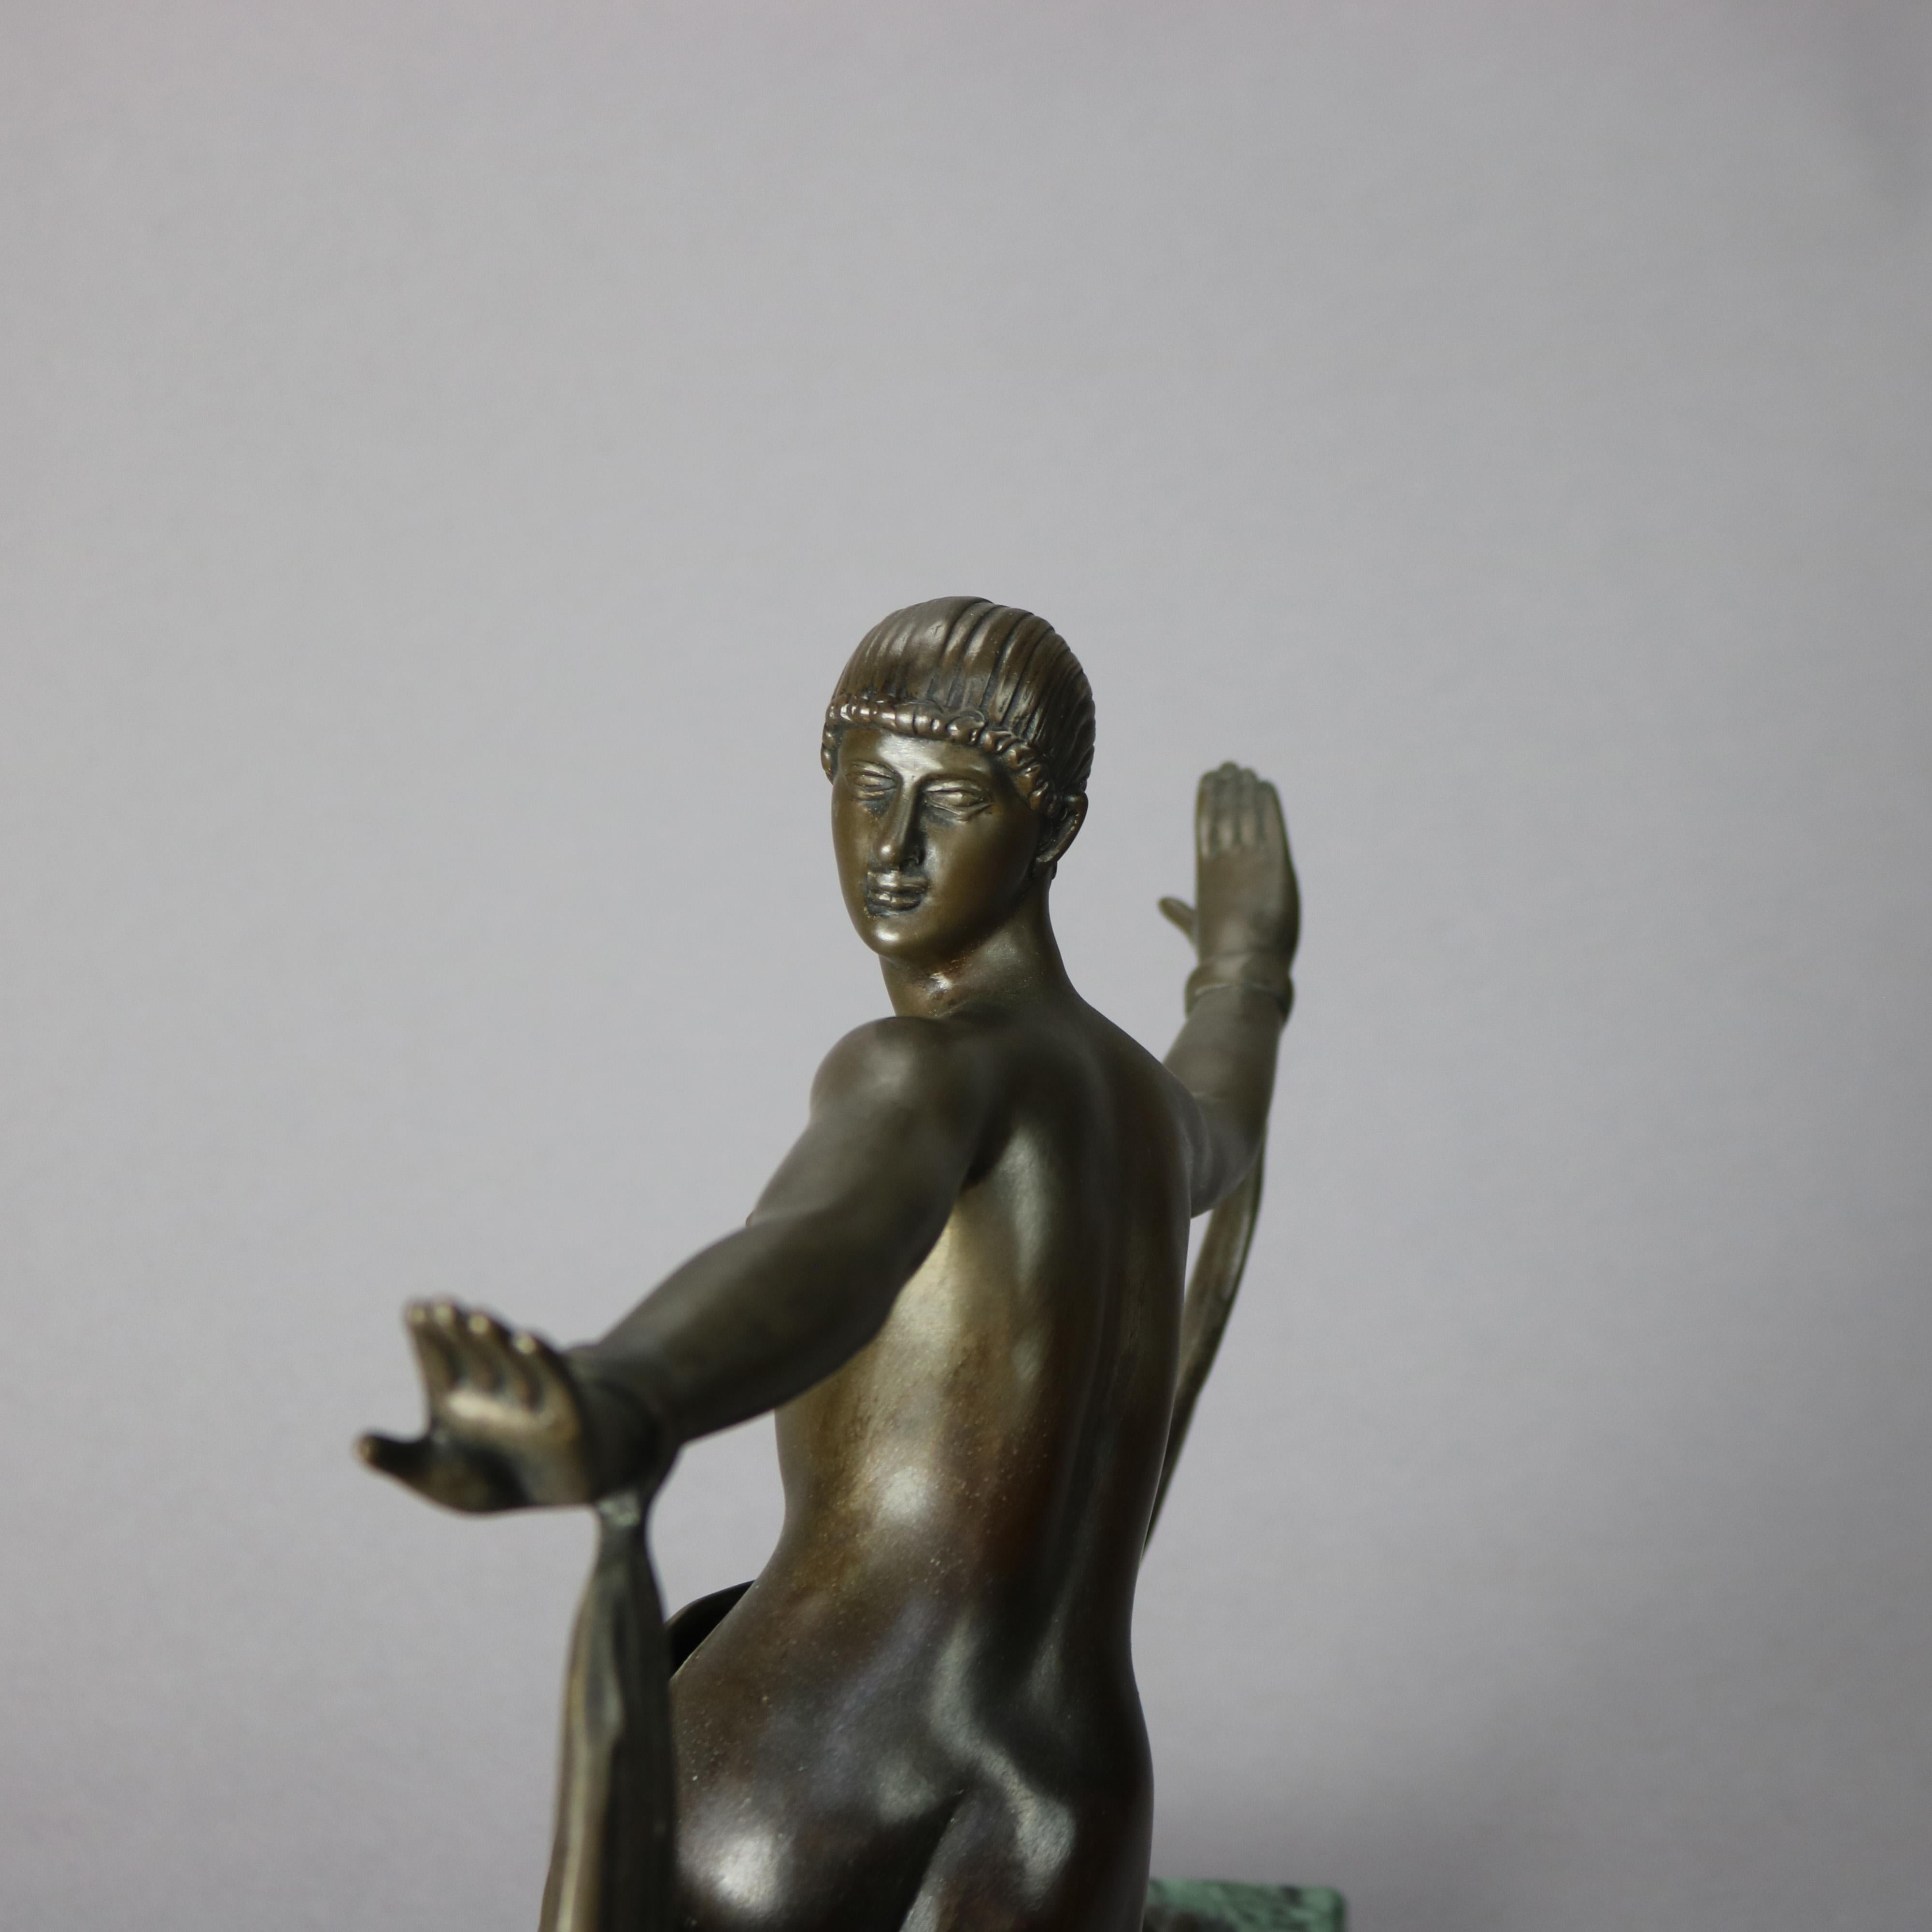 Antique French Bronzed Metal Sculpture of a Woman, Signed Paris Buyne, 19th C 9